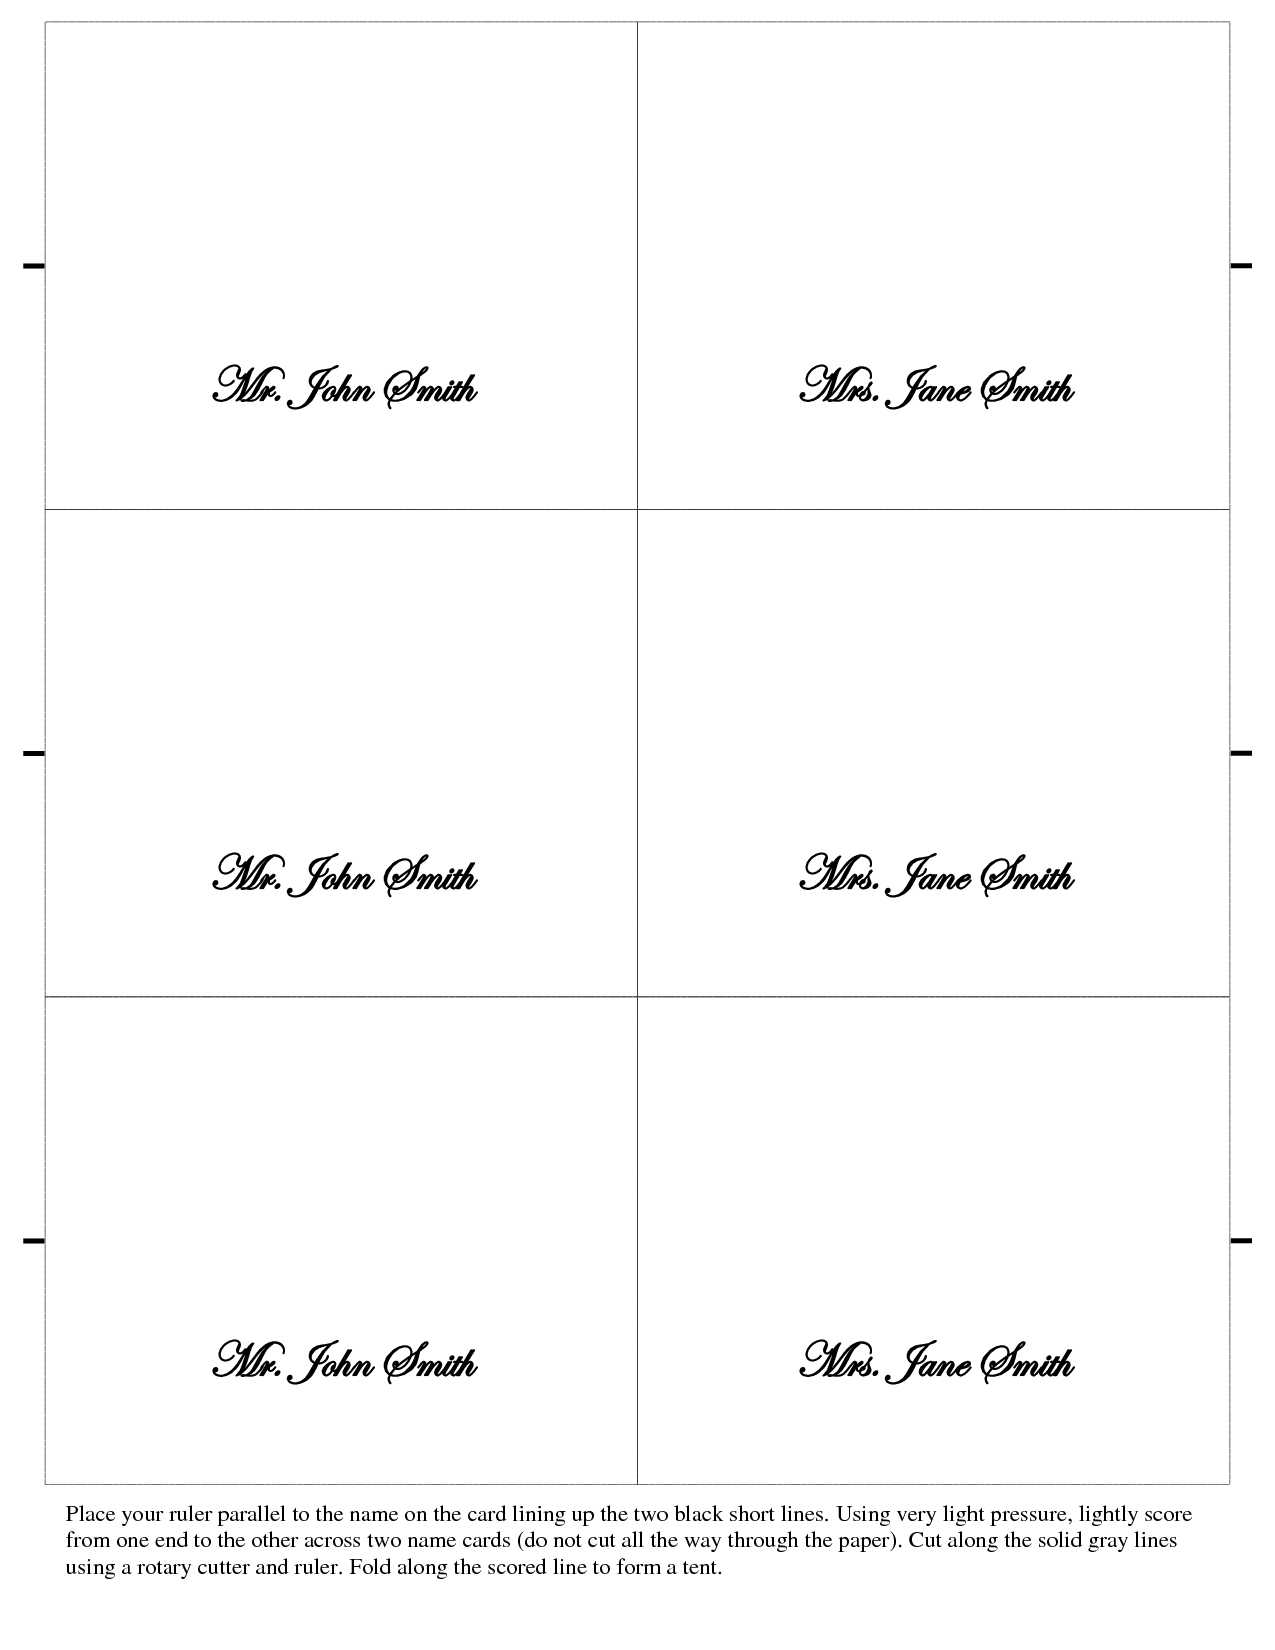 Free Place Card Templates 6 Per Page - Atlantaauctionco In Free Place Card Templates 6 Per Page